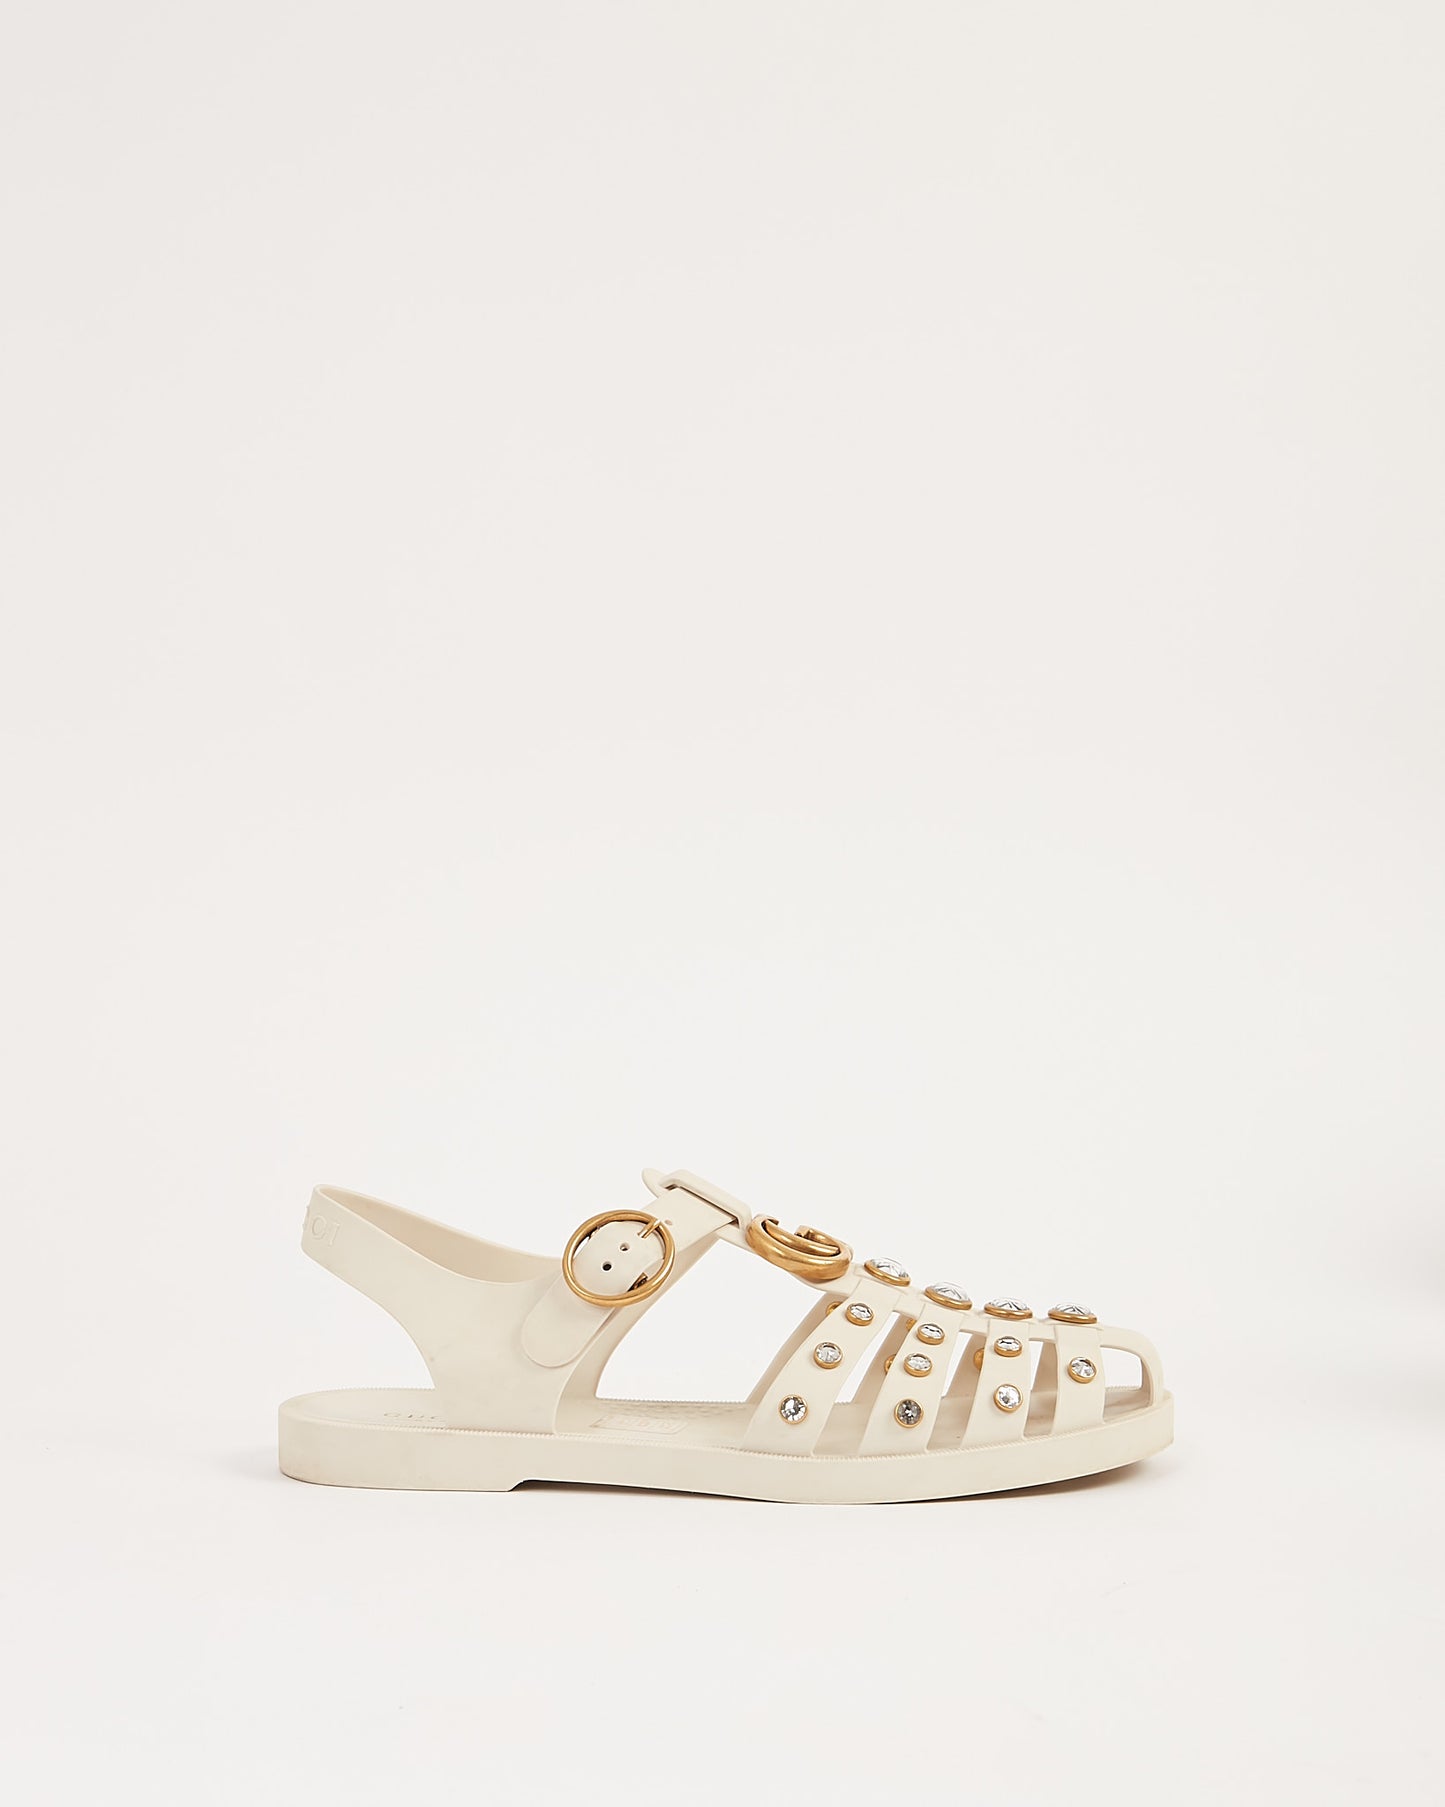 Gucci Cream Rubber GG Marmont Studded Jewel Sandal - 38